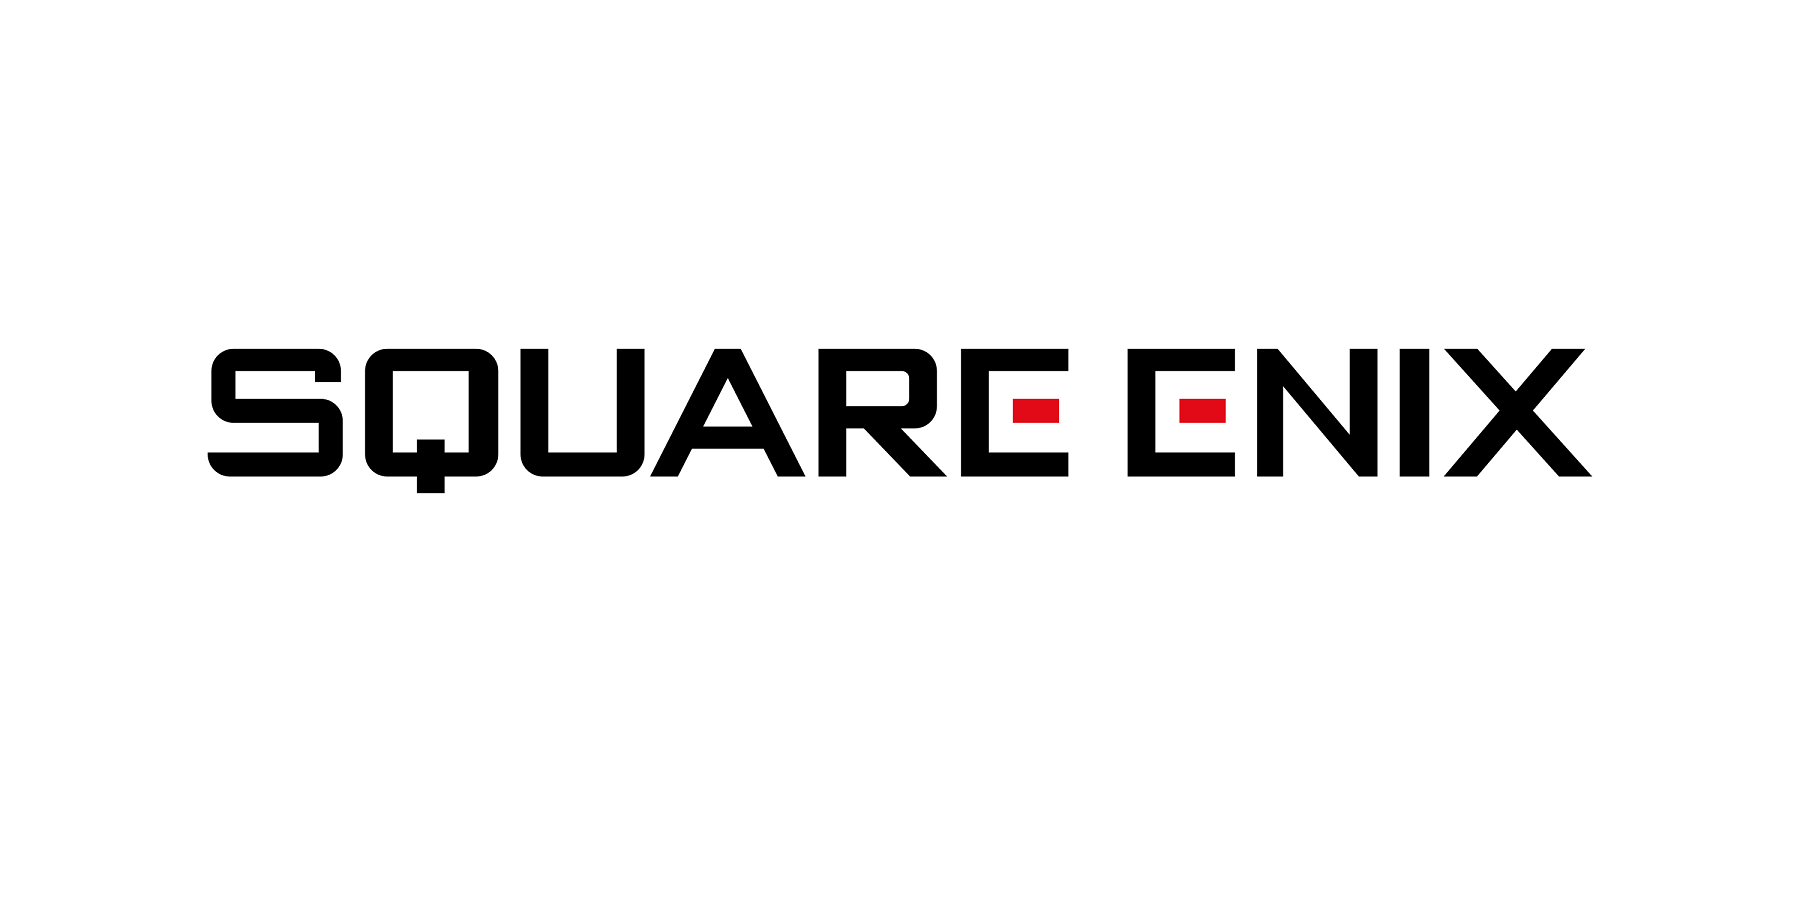 square enix announces shutdown of two mobile games, one less than a year after release